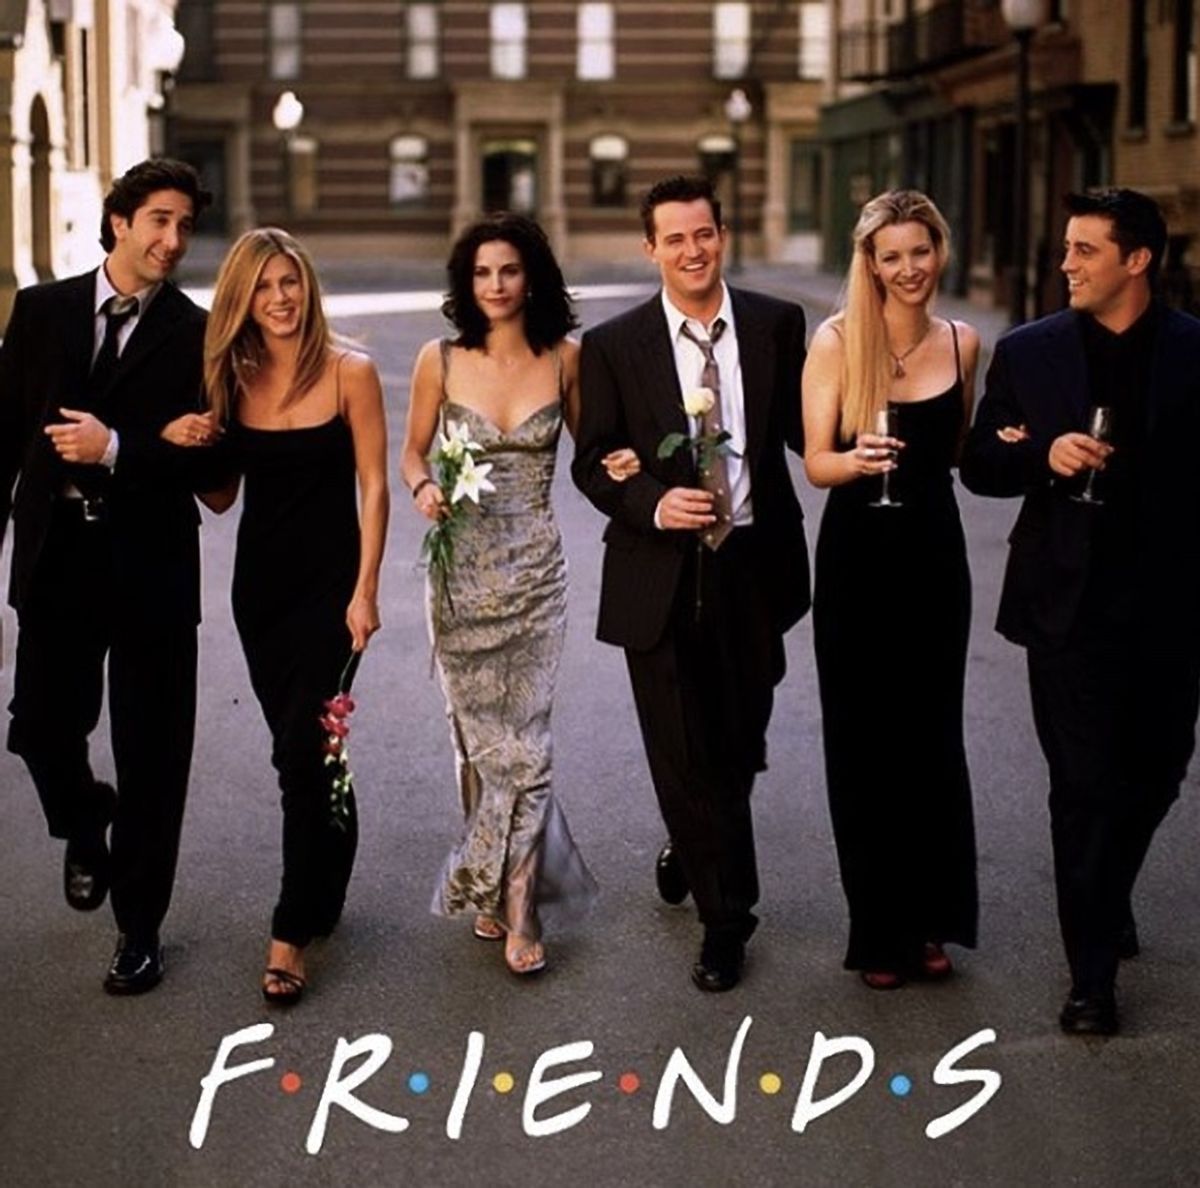 5 Times 'Friends' Has Been Totally Relatable To My College Semester